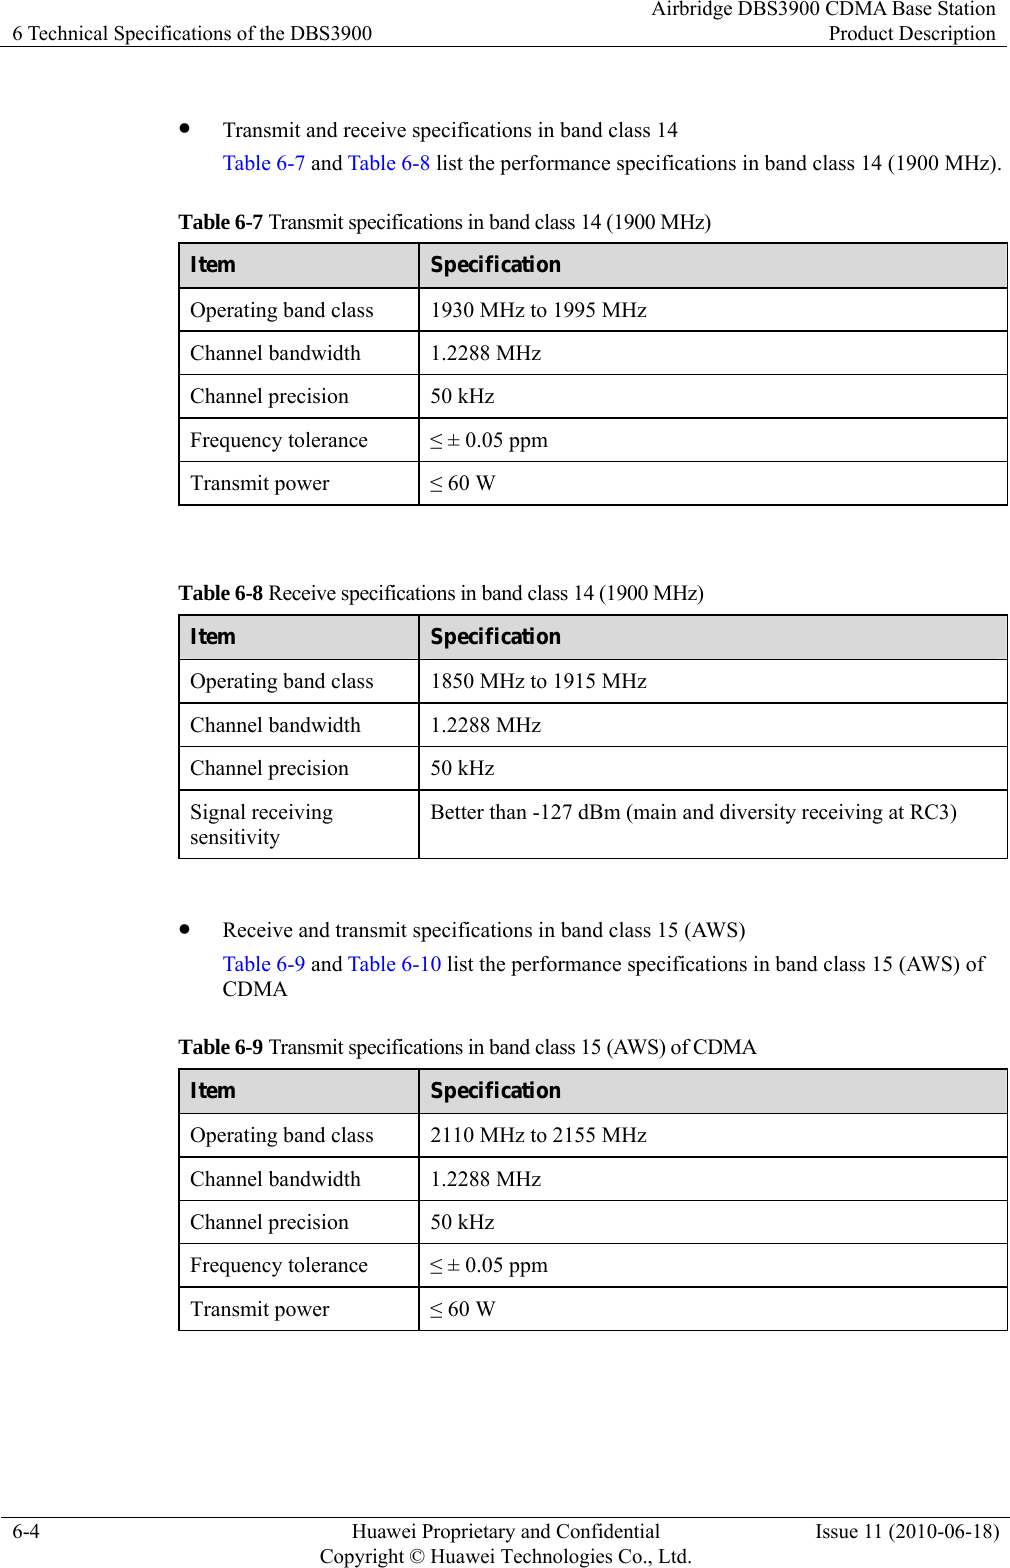 6 Technical Specifications of the DBS3900 Airbridge DBS3900 CDMA Base StationProduct Description 6-4  Huawei Proprietary and Confidential     Copyright © Huawei Technologies Co., Ltd.Issue 11 (2010-06-18)  z Transmit and receive specifications in band class 14 Table 6-7 and Table 6-8 list the performance specifications in band class 14 (1900 MHz). Table 6-7 Transmit specifications in band class 14 (1900 MHz) Item  Specification Operating band class  1930 MHz to 1995 MHz Channel bandwidth  1.2288 MHz Channel precision  50 kHz Frequency tolerance  ≤ ± 0.05 ppm Transmit power  ≤ 60 W  Table 6-8 Receive specifications in band class 14 (1900 MHz) Item  Specification Operating band class  1850 MHz to 1915 MHz Channel bandwidth  1.2288 MHz Channel precision  50 kHz Signal receiving sensitivity Better than -127 dBm (main and diversity receiving at RC3)  z Receive and transmit specifications in band class 15 (AWS) Table 6-9 and Table 6-10 list the performance specifications in band class 15 (AWS) of CDMA Table 6-9 Transmit specifications in band class 15 (AWS) of CDMA Item  Specification Operating band class  2110 MHz to 2155 MHz Channel bandwidth  1.2288 MHz Channel precision  50 kHz Frequency tolerance  ≤ ± 0.05 ppm Transmit power  ≤ 60 W  